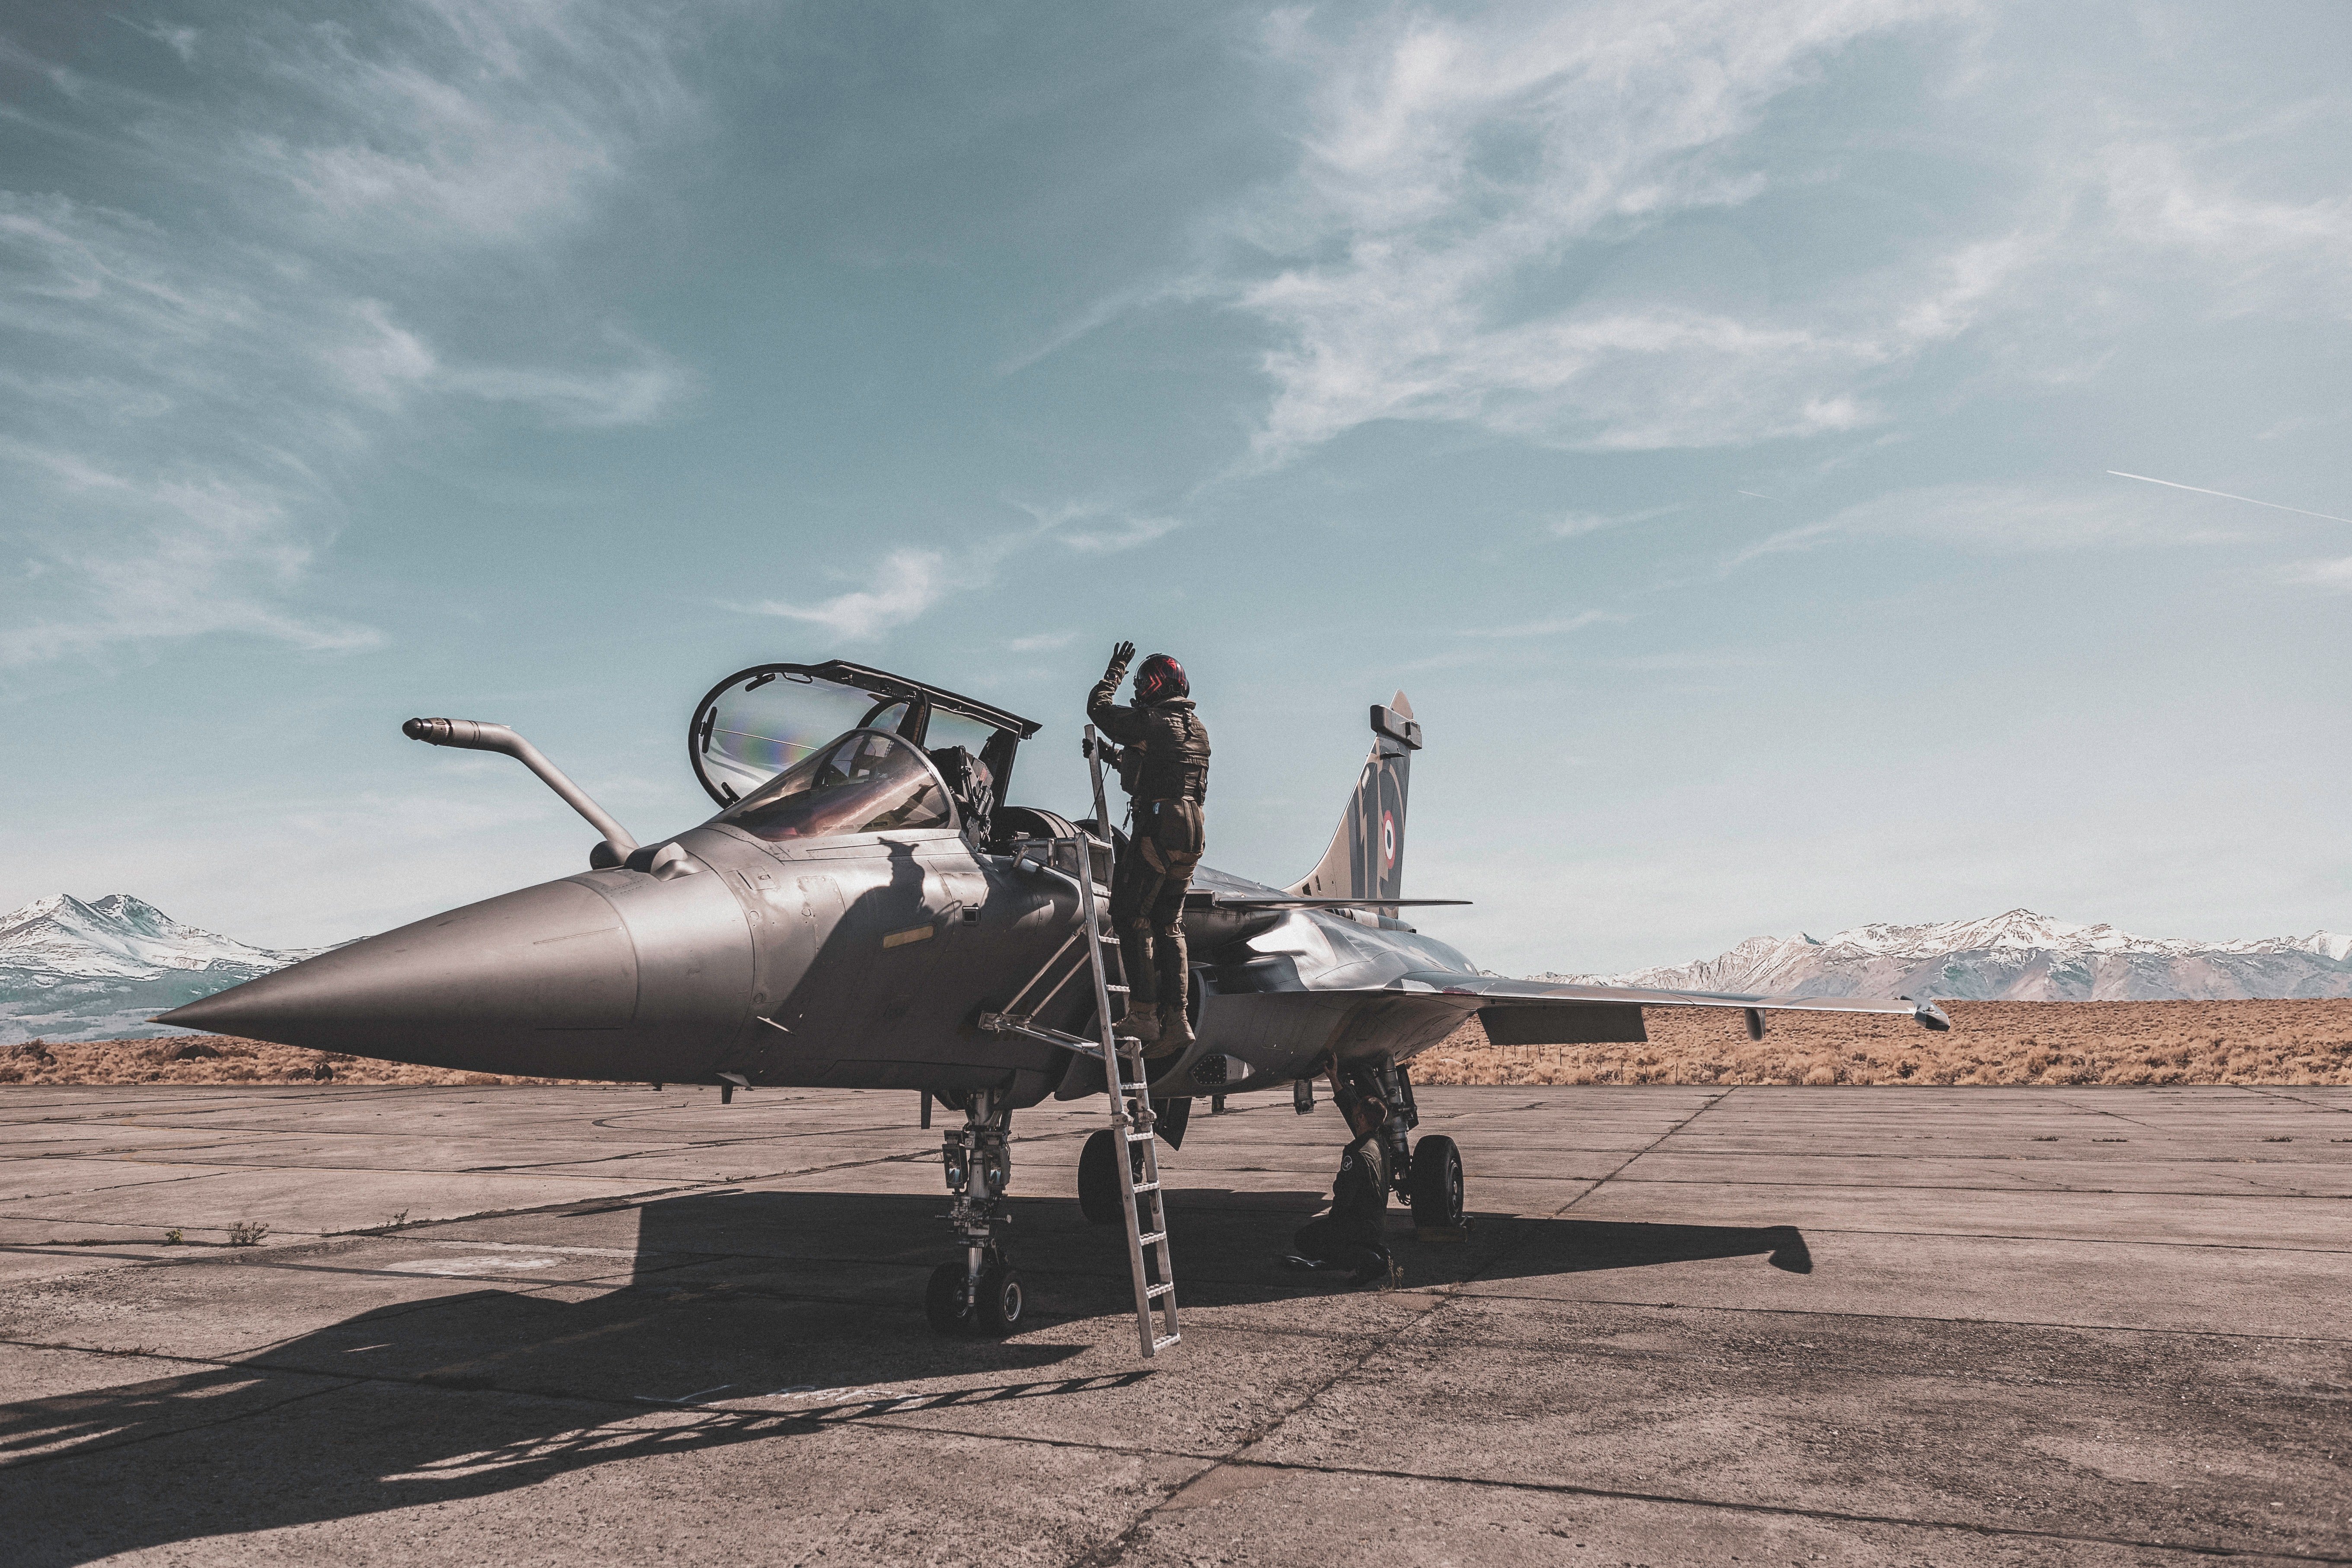 OP aspires to become an Aerospace Engineer in the USAF. | Source: Pexels